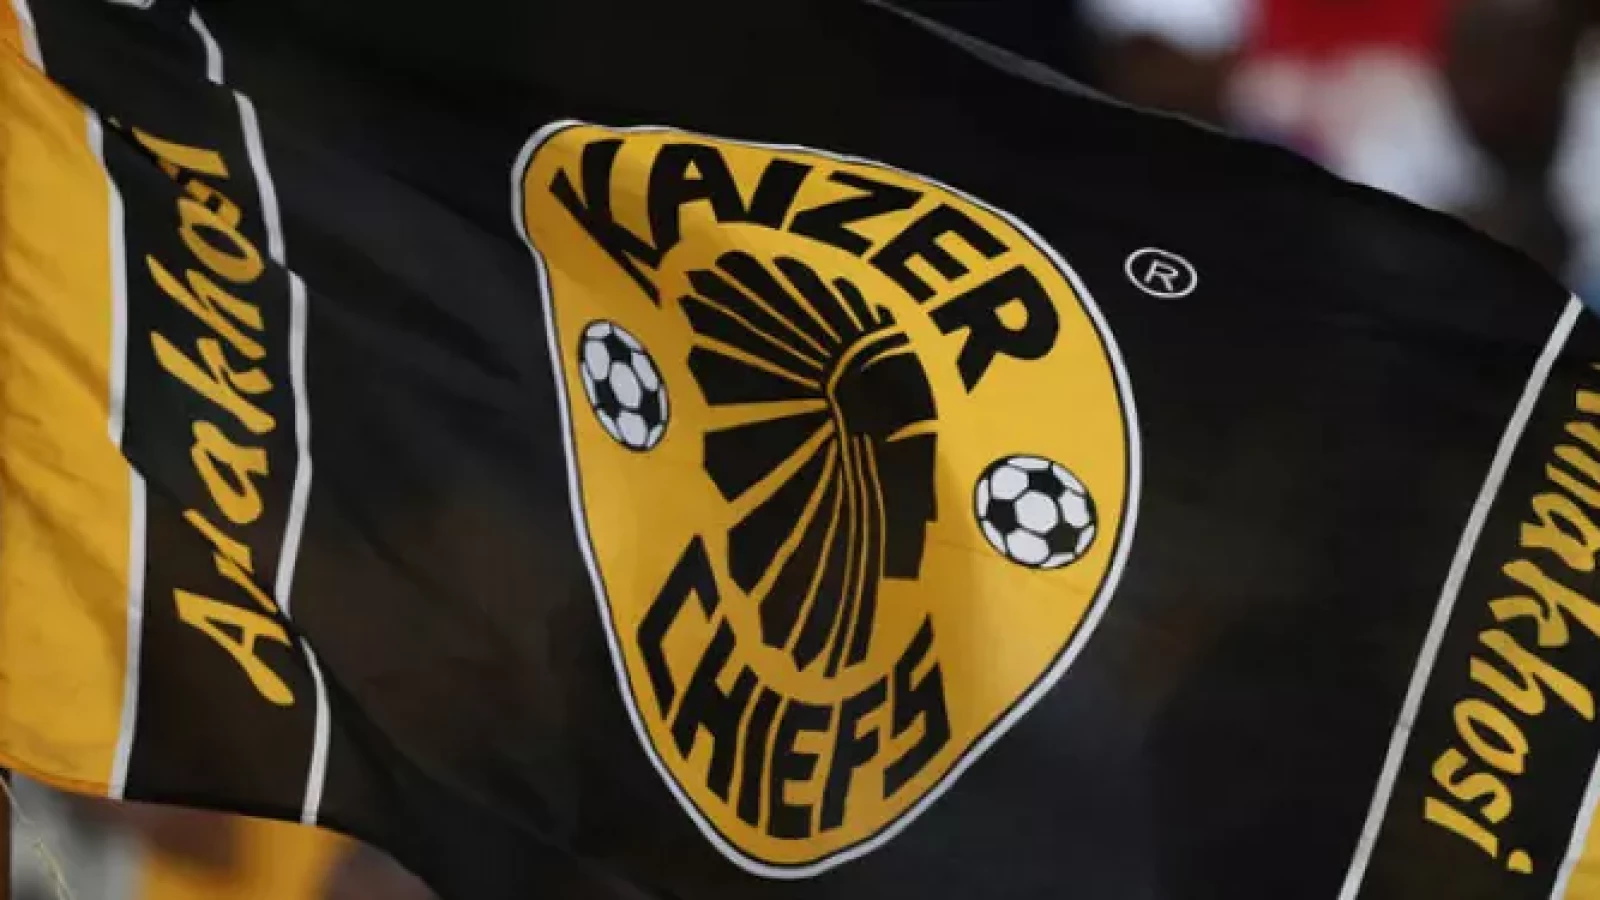 Kaizer Chiefs F.C History: From Founding to Present Day